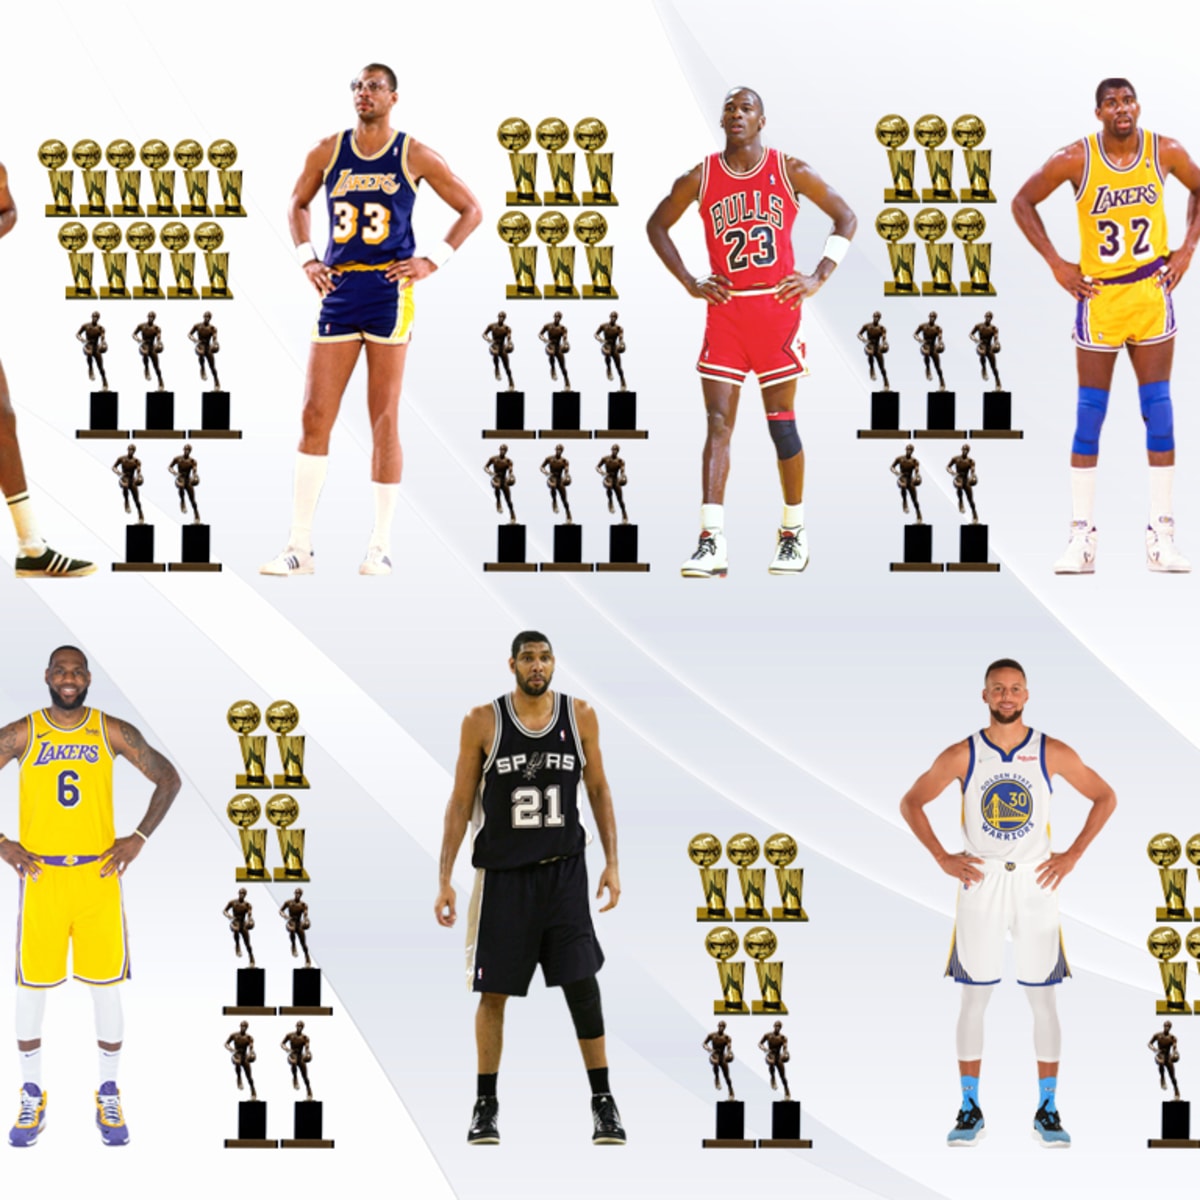 The Only NBA Players Who Won 4 Championships, 2 MVP Awards, And 1